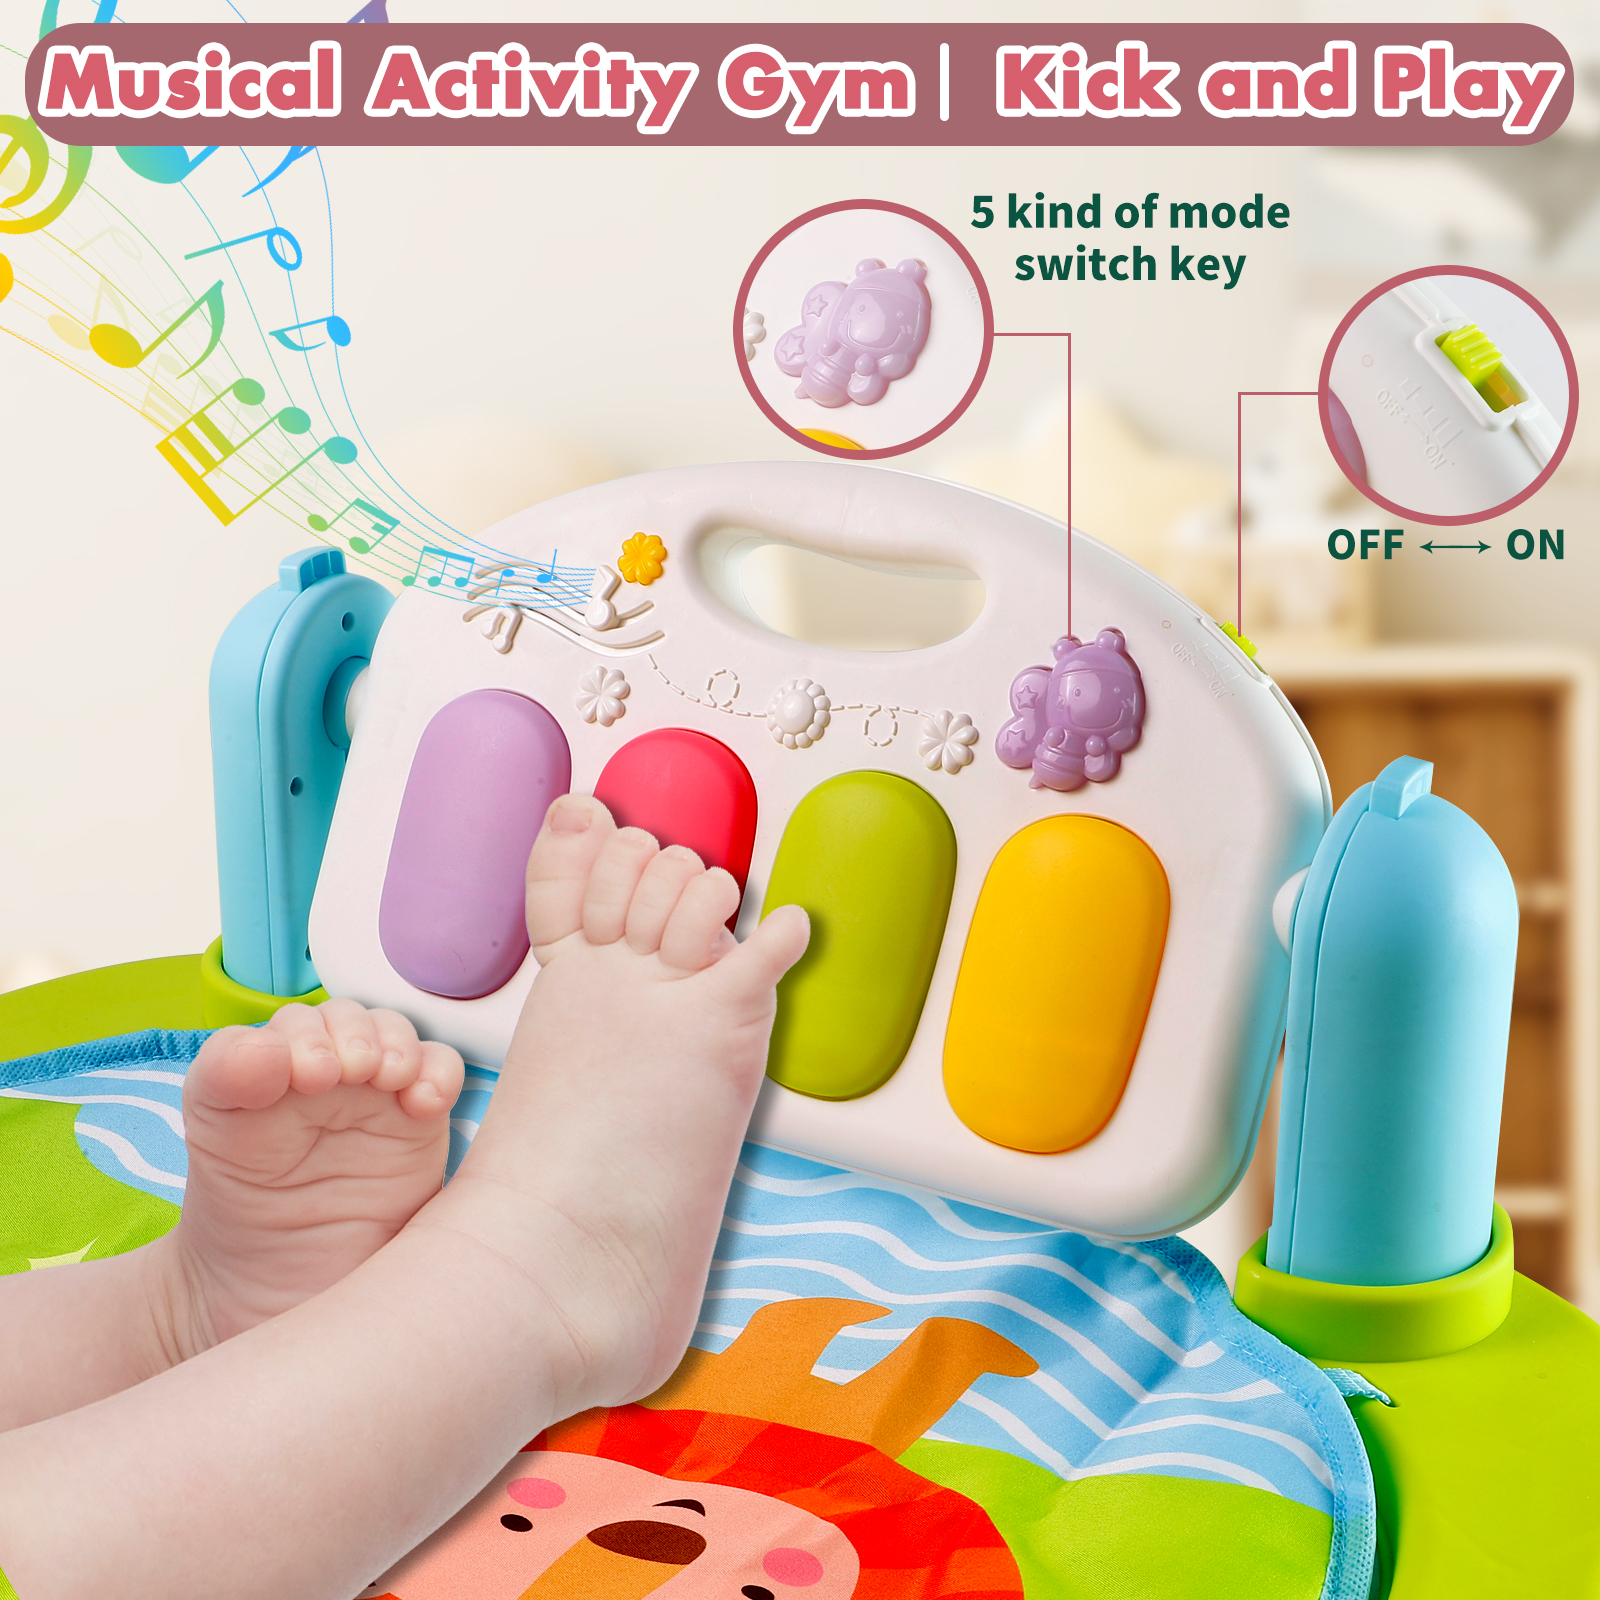 Baby Play Mat Baby Gym Funny Play Piano Tummy Time Baby Activity Gym Mat with 5 Infant Learning Sensory Baby Toys, Music and Lights Boy & Girl Gifts for Newborn Baby 0 to 3 6 9 12 Months - image 5 of 7